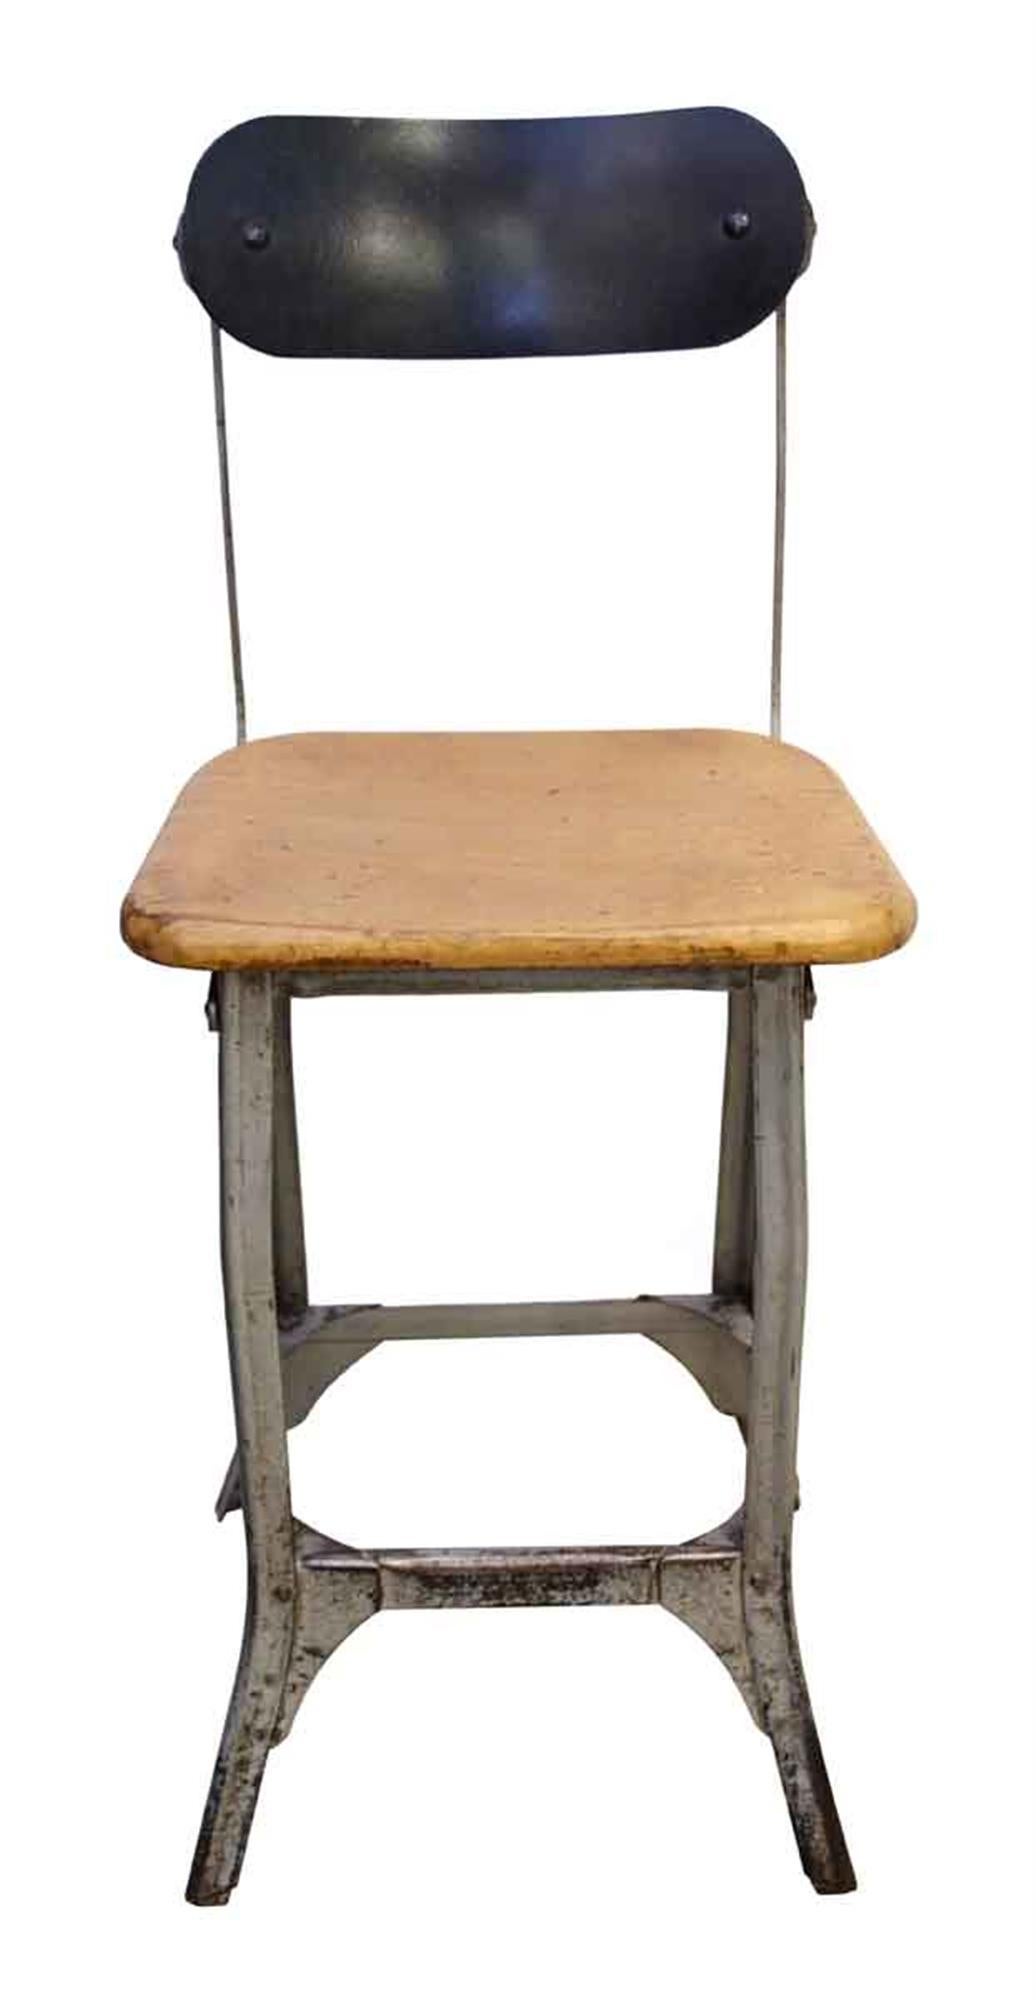 1940s stool with a light wood tone seat and refinished metal back. This has charm and durability! This can be seen at our 5 East 16th St location on Union Square in Manhattan.